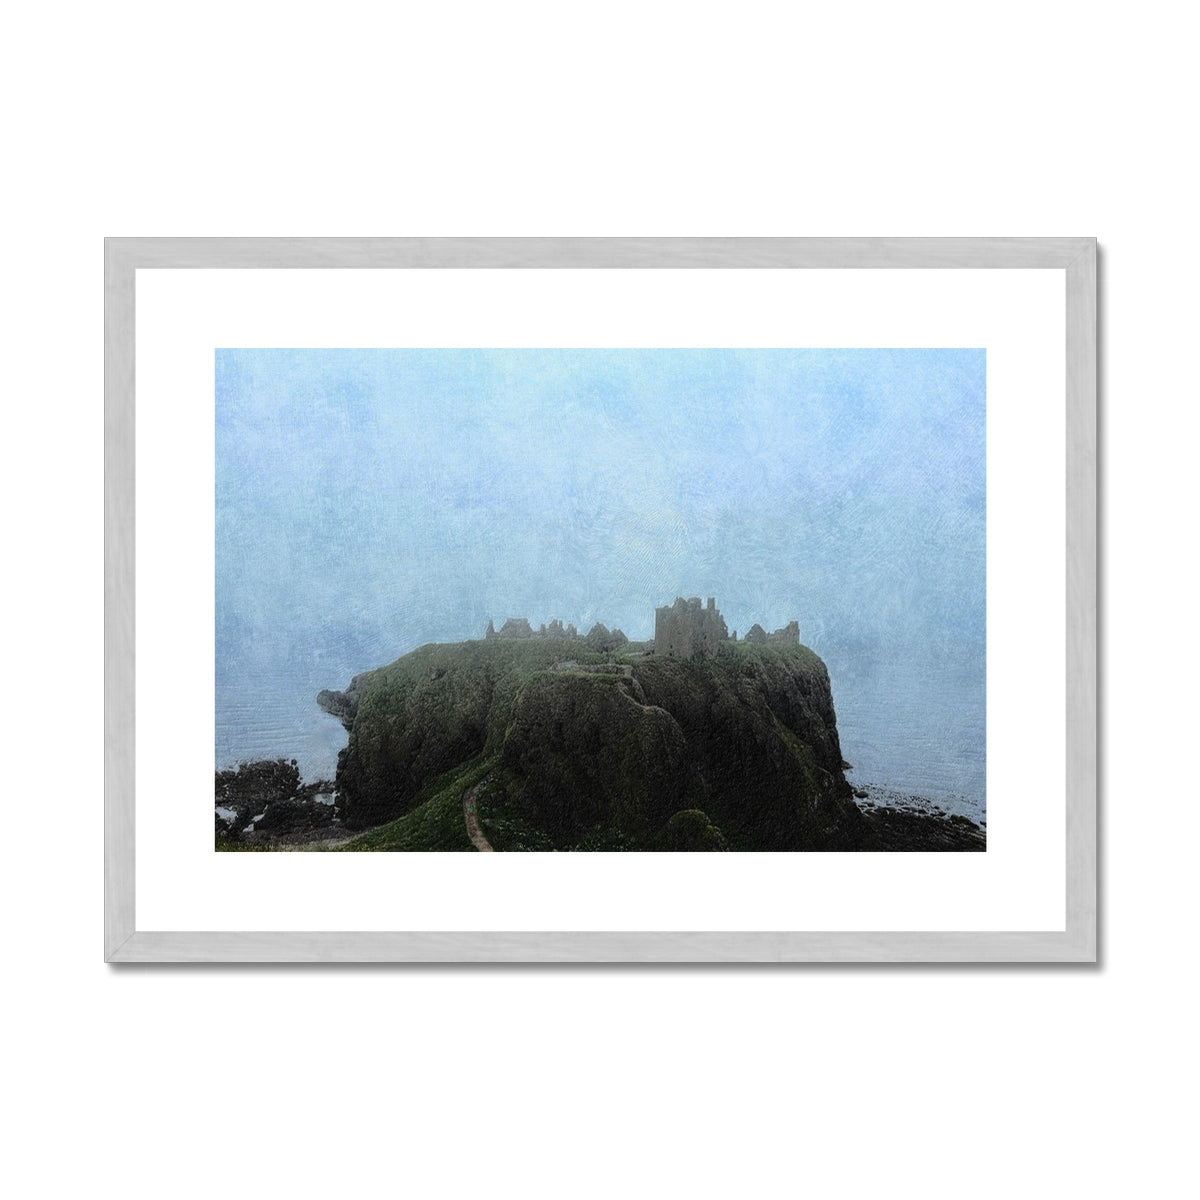 Dunnottar Castle Mist Painting | Antique Framed & Mounted Prints From Scotland-Antique Framed & Mounted Prints-Historic & Iconic Scotland Art Gallery-A2 Landscape-Silver Frame-Paintings, Prints, Homeware, Art Gifts From Scotland By Scottish Artist Kevin Hunter